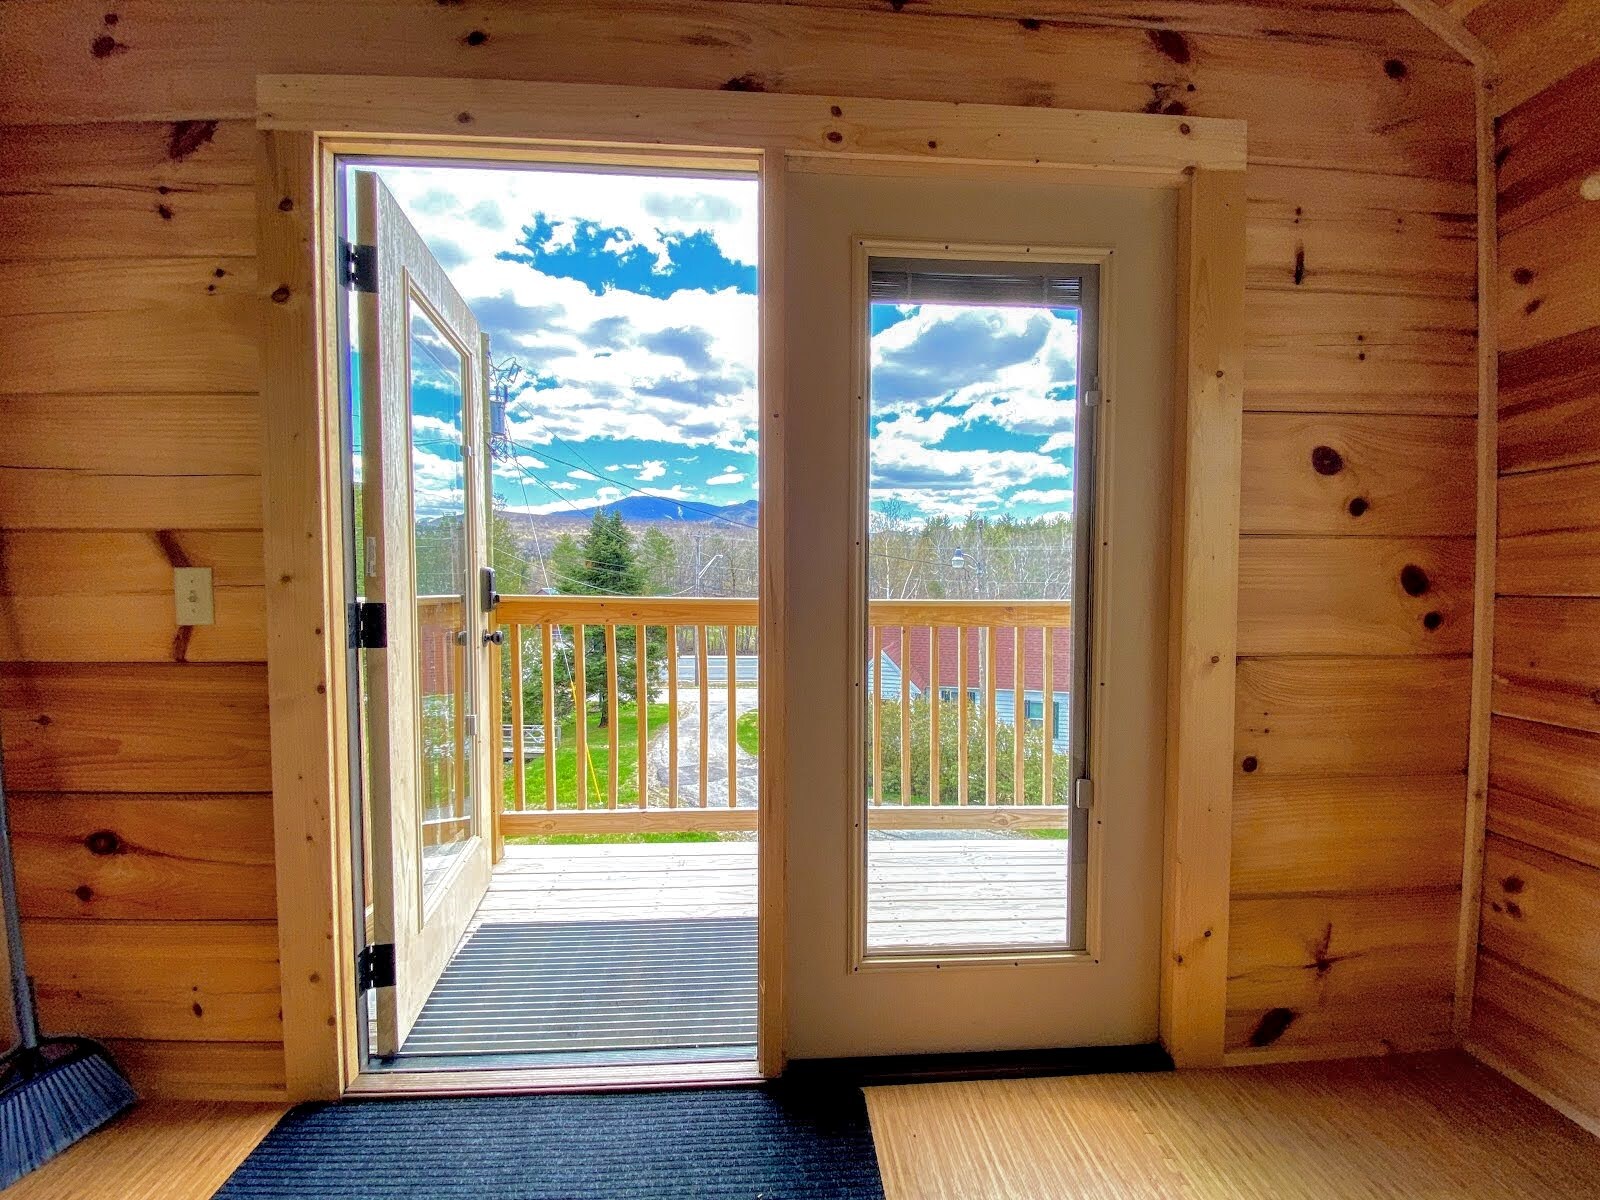 Property Image 2 - Awesome "Tiny Home" with A/C, Mountain Views, Minutes to Skiing, Hiking, Attractions